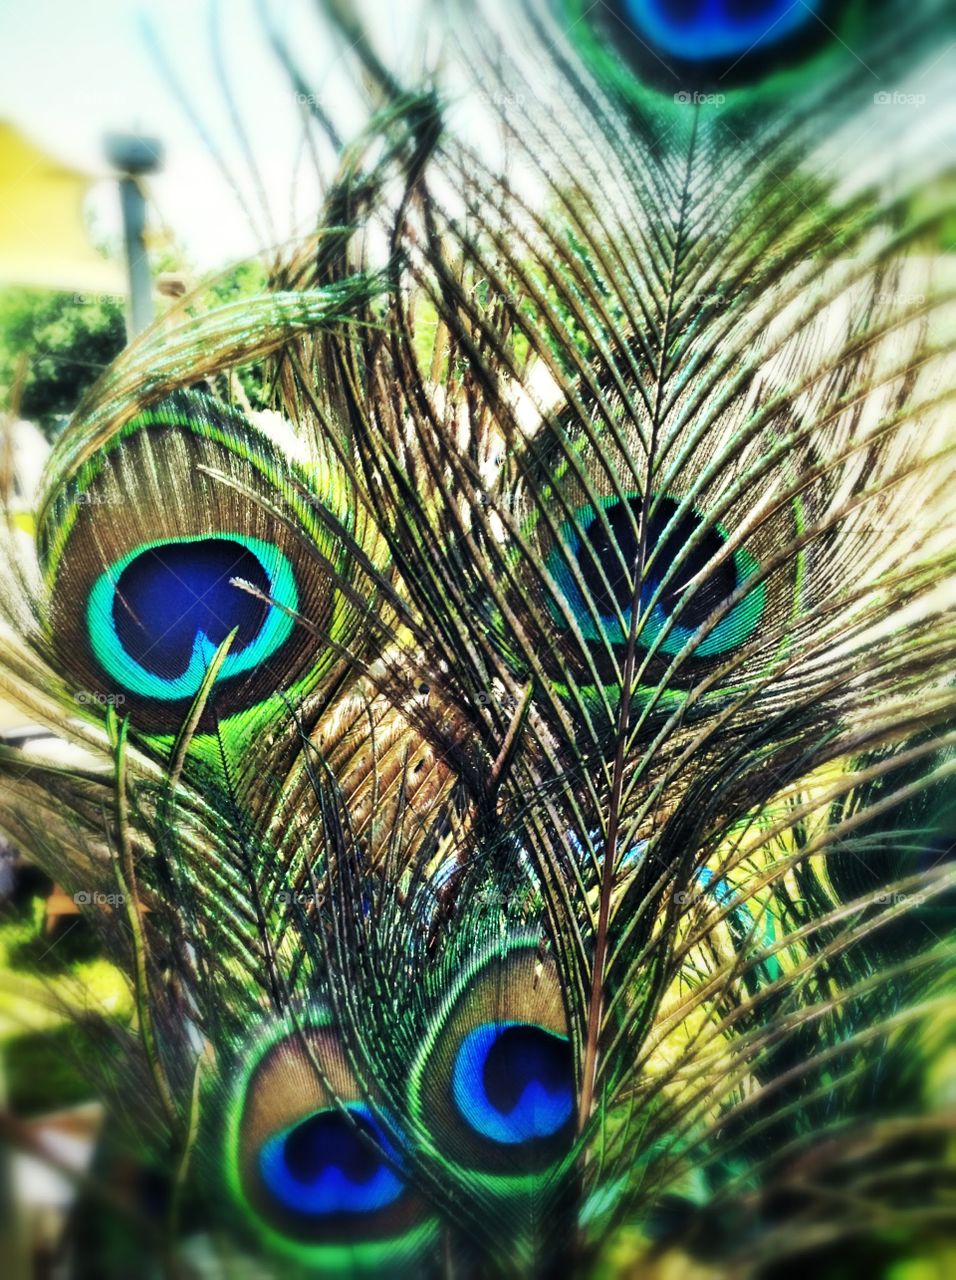 The eyes . A peacocks feathers.